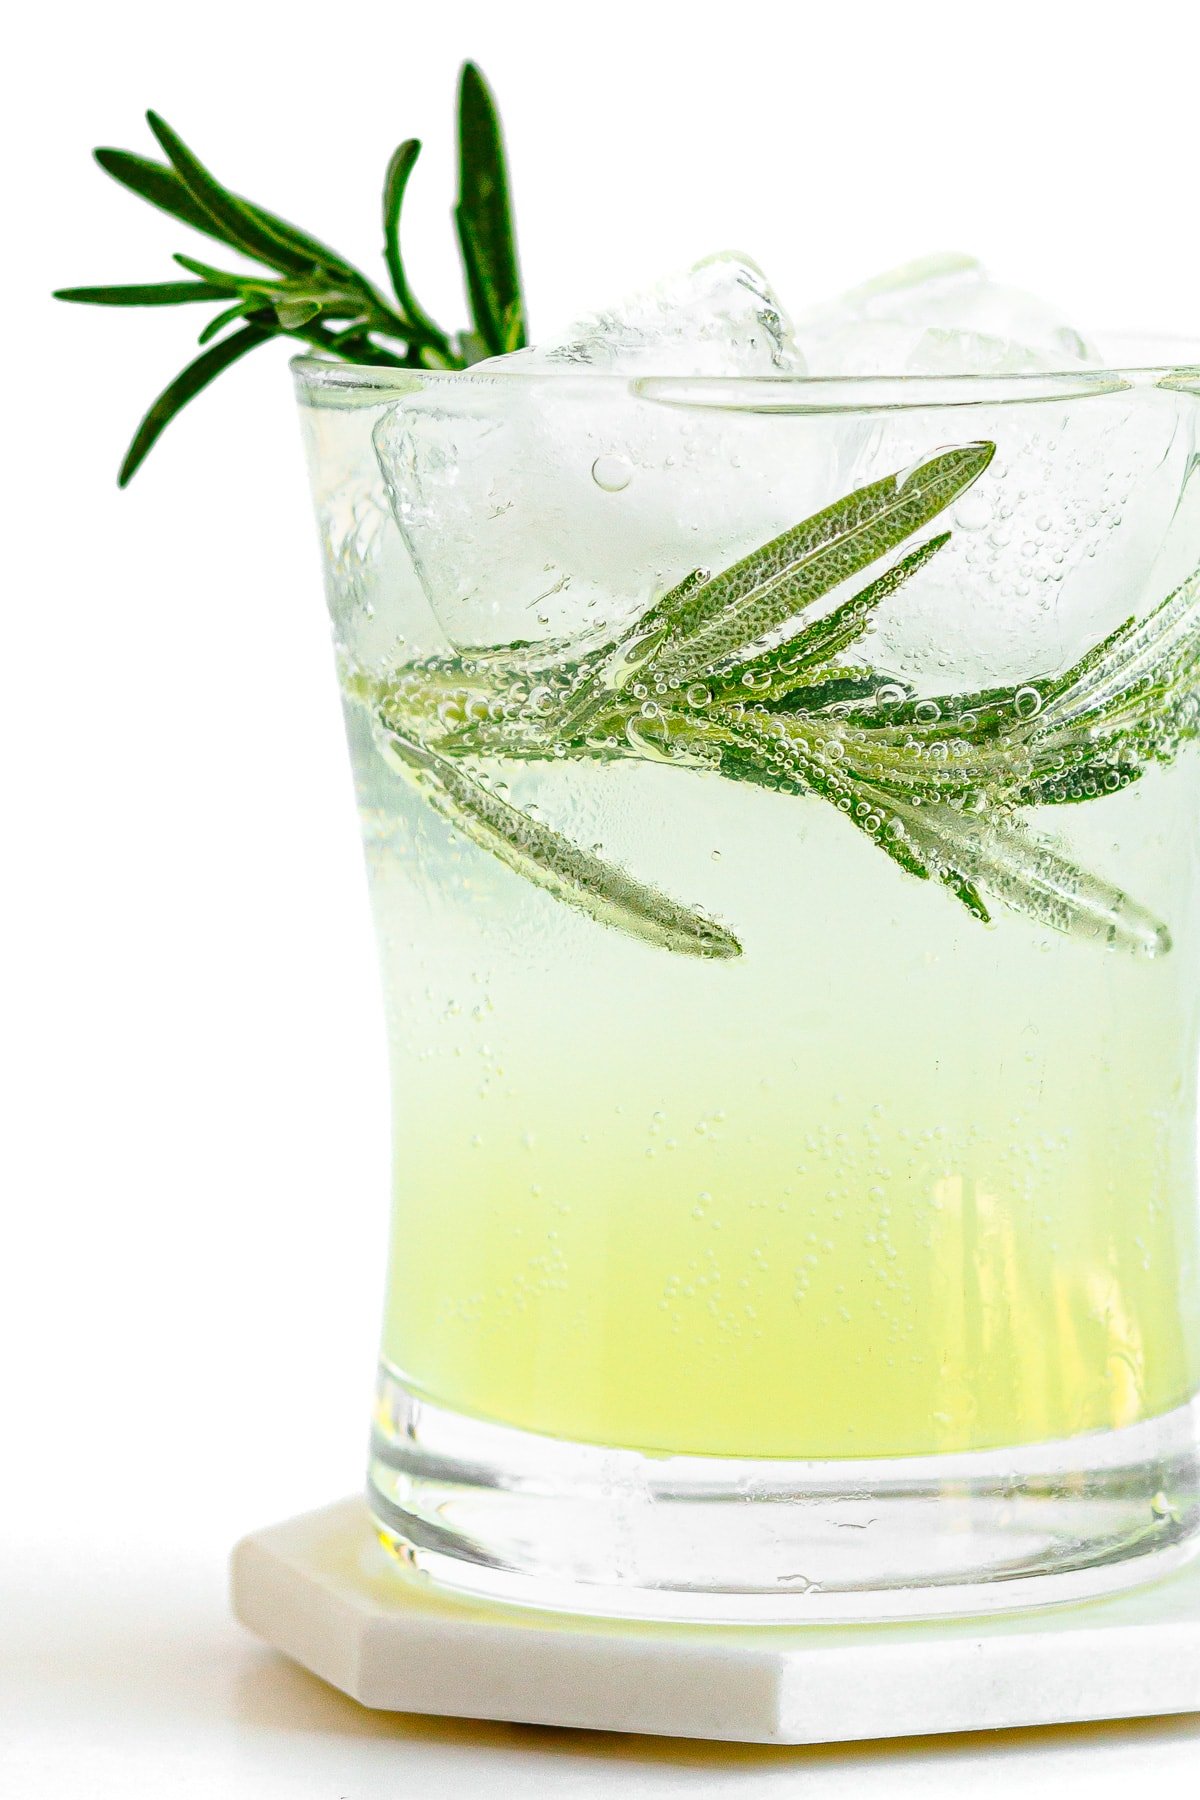 Close up of a glass of limoncello tonic garnished with rosemary.